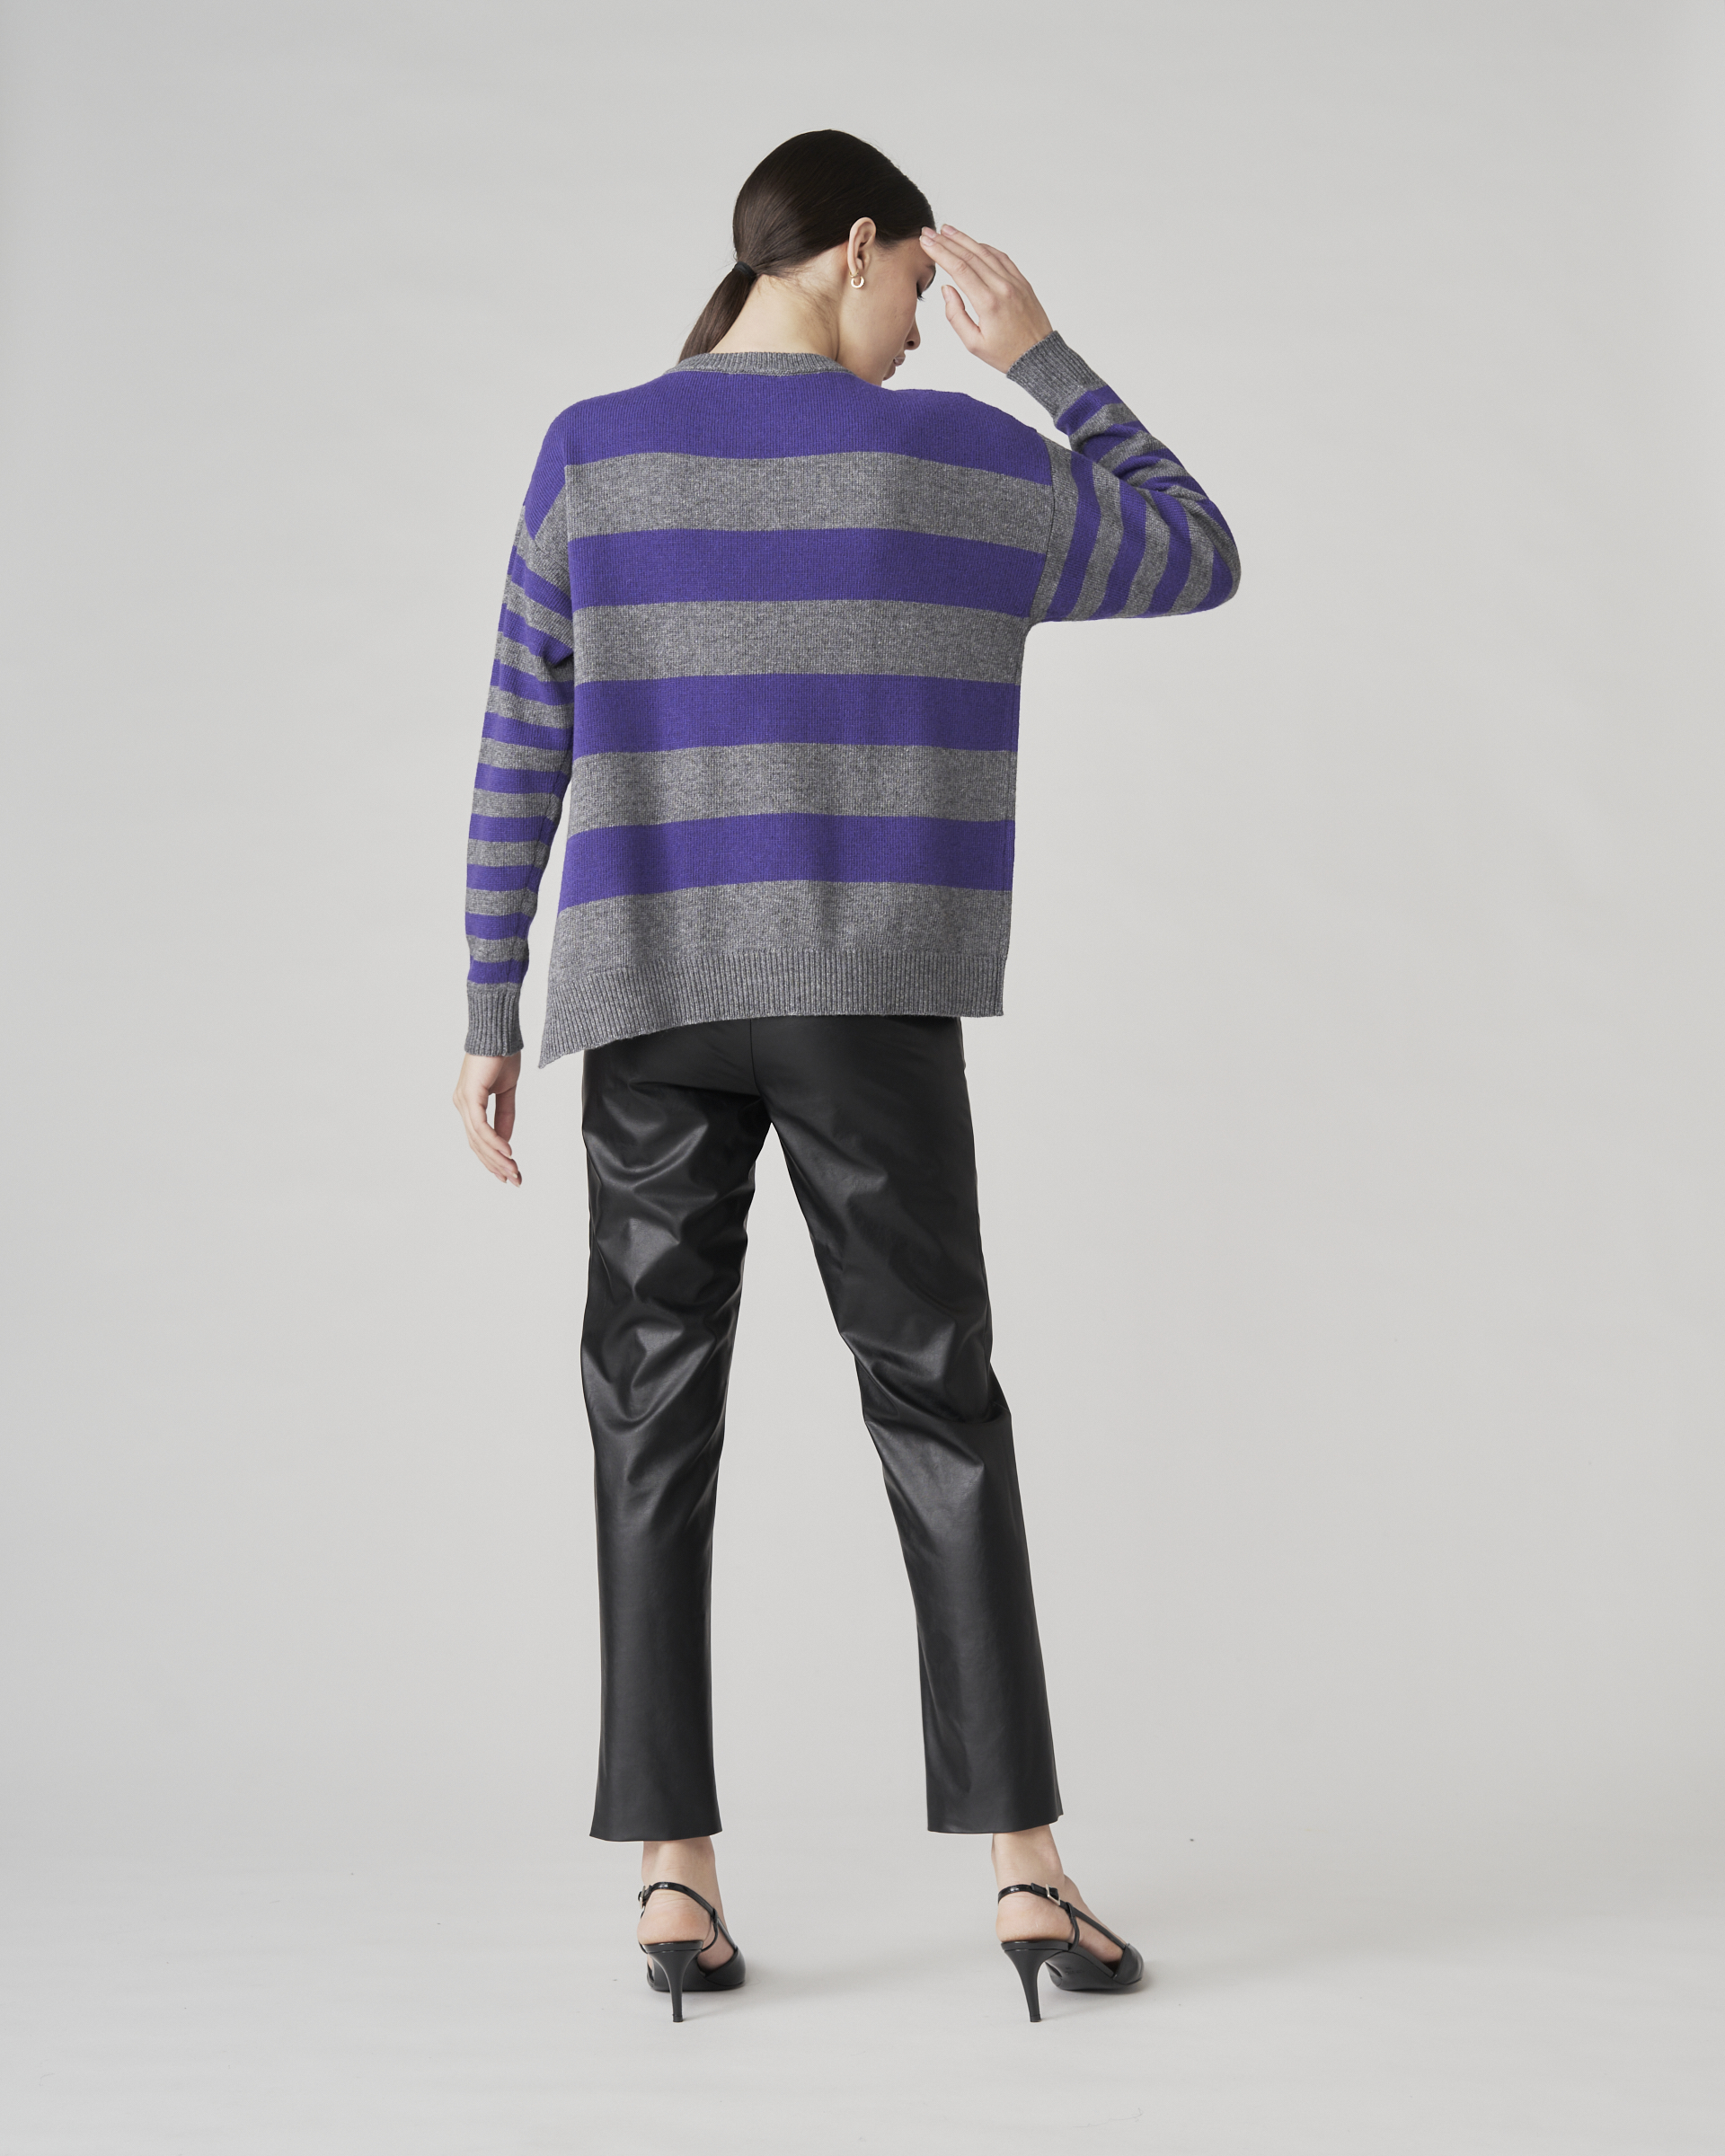 The Market Store | Striped Knit Crew Neck With Fringe